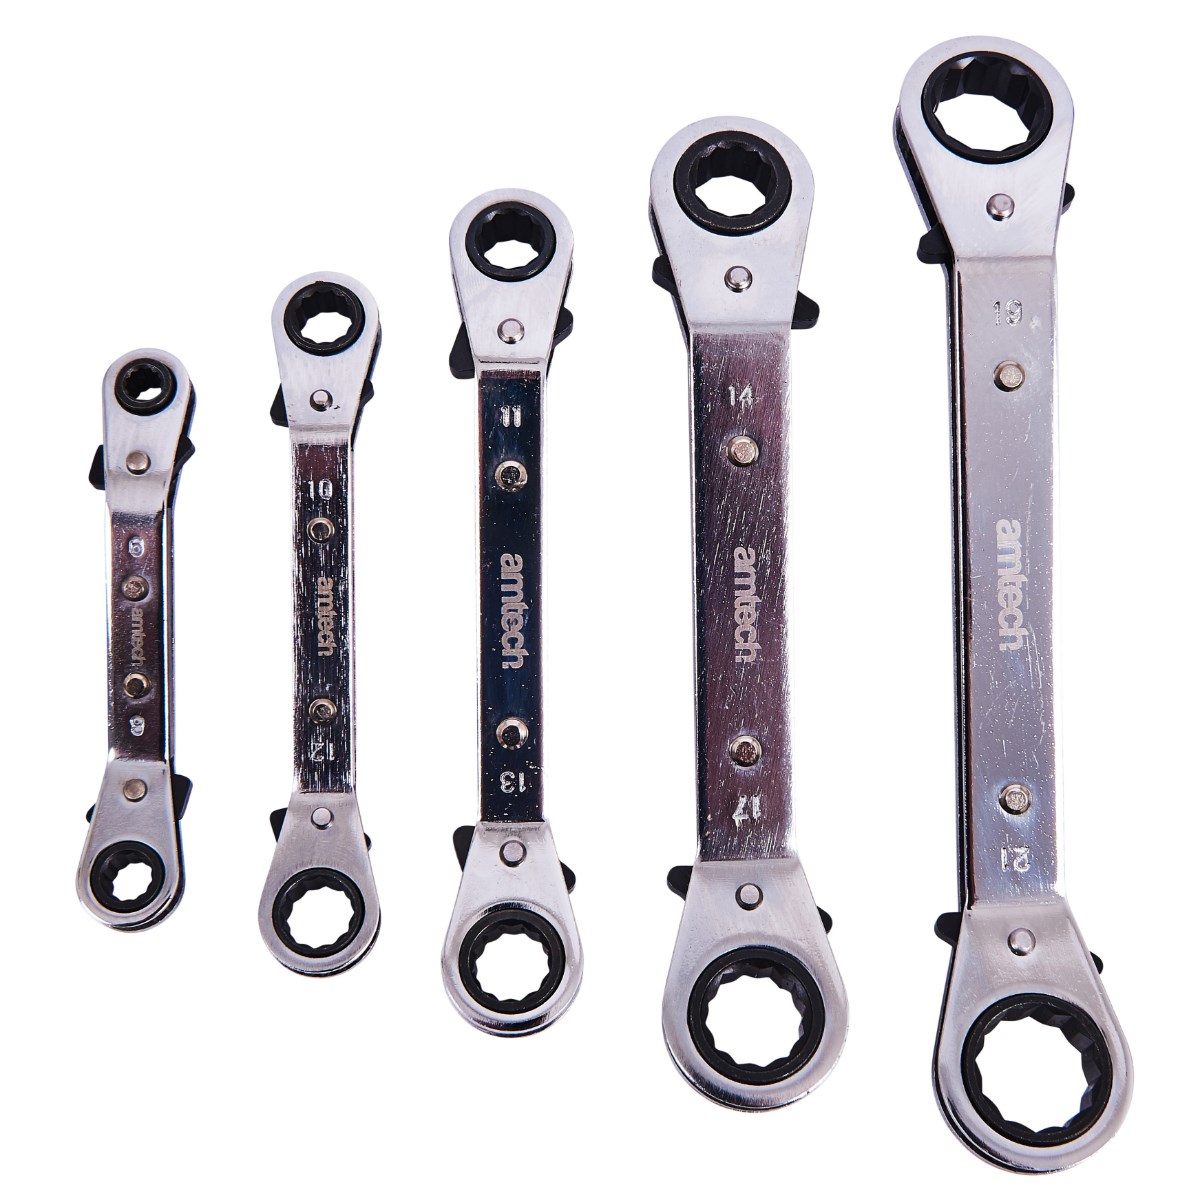 Toolzone 5pc Metric Ratchet Ring Spanner Sets 